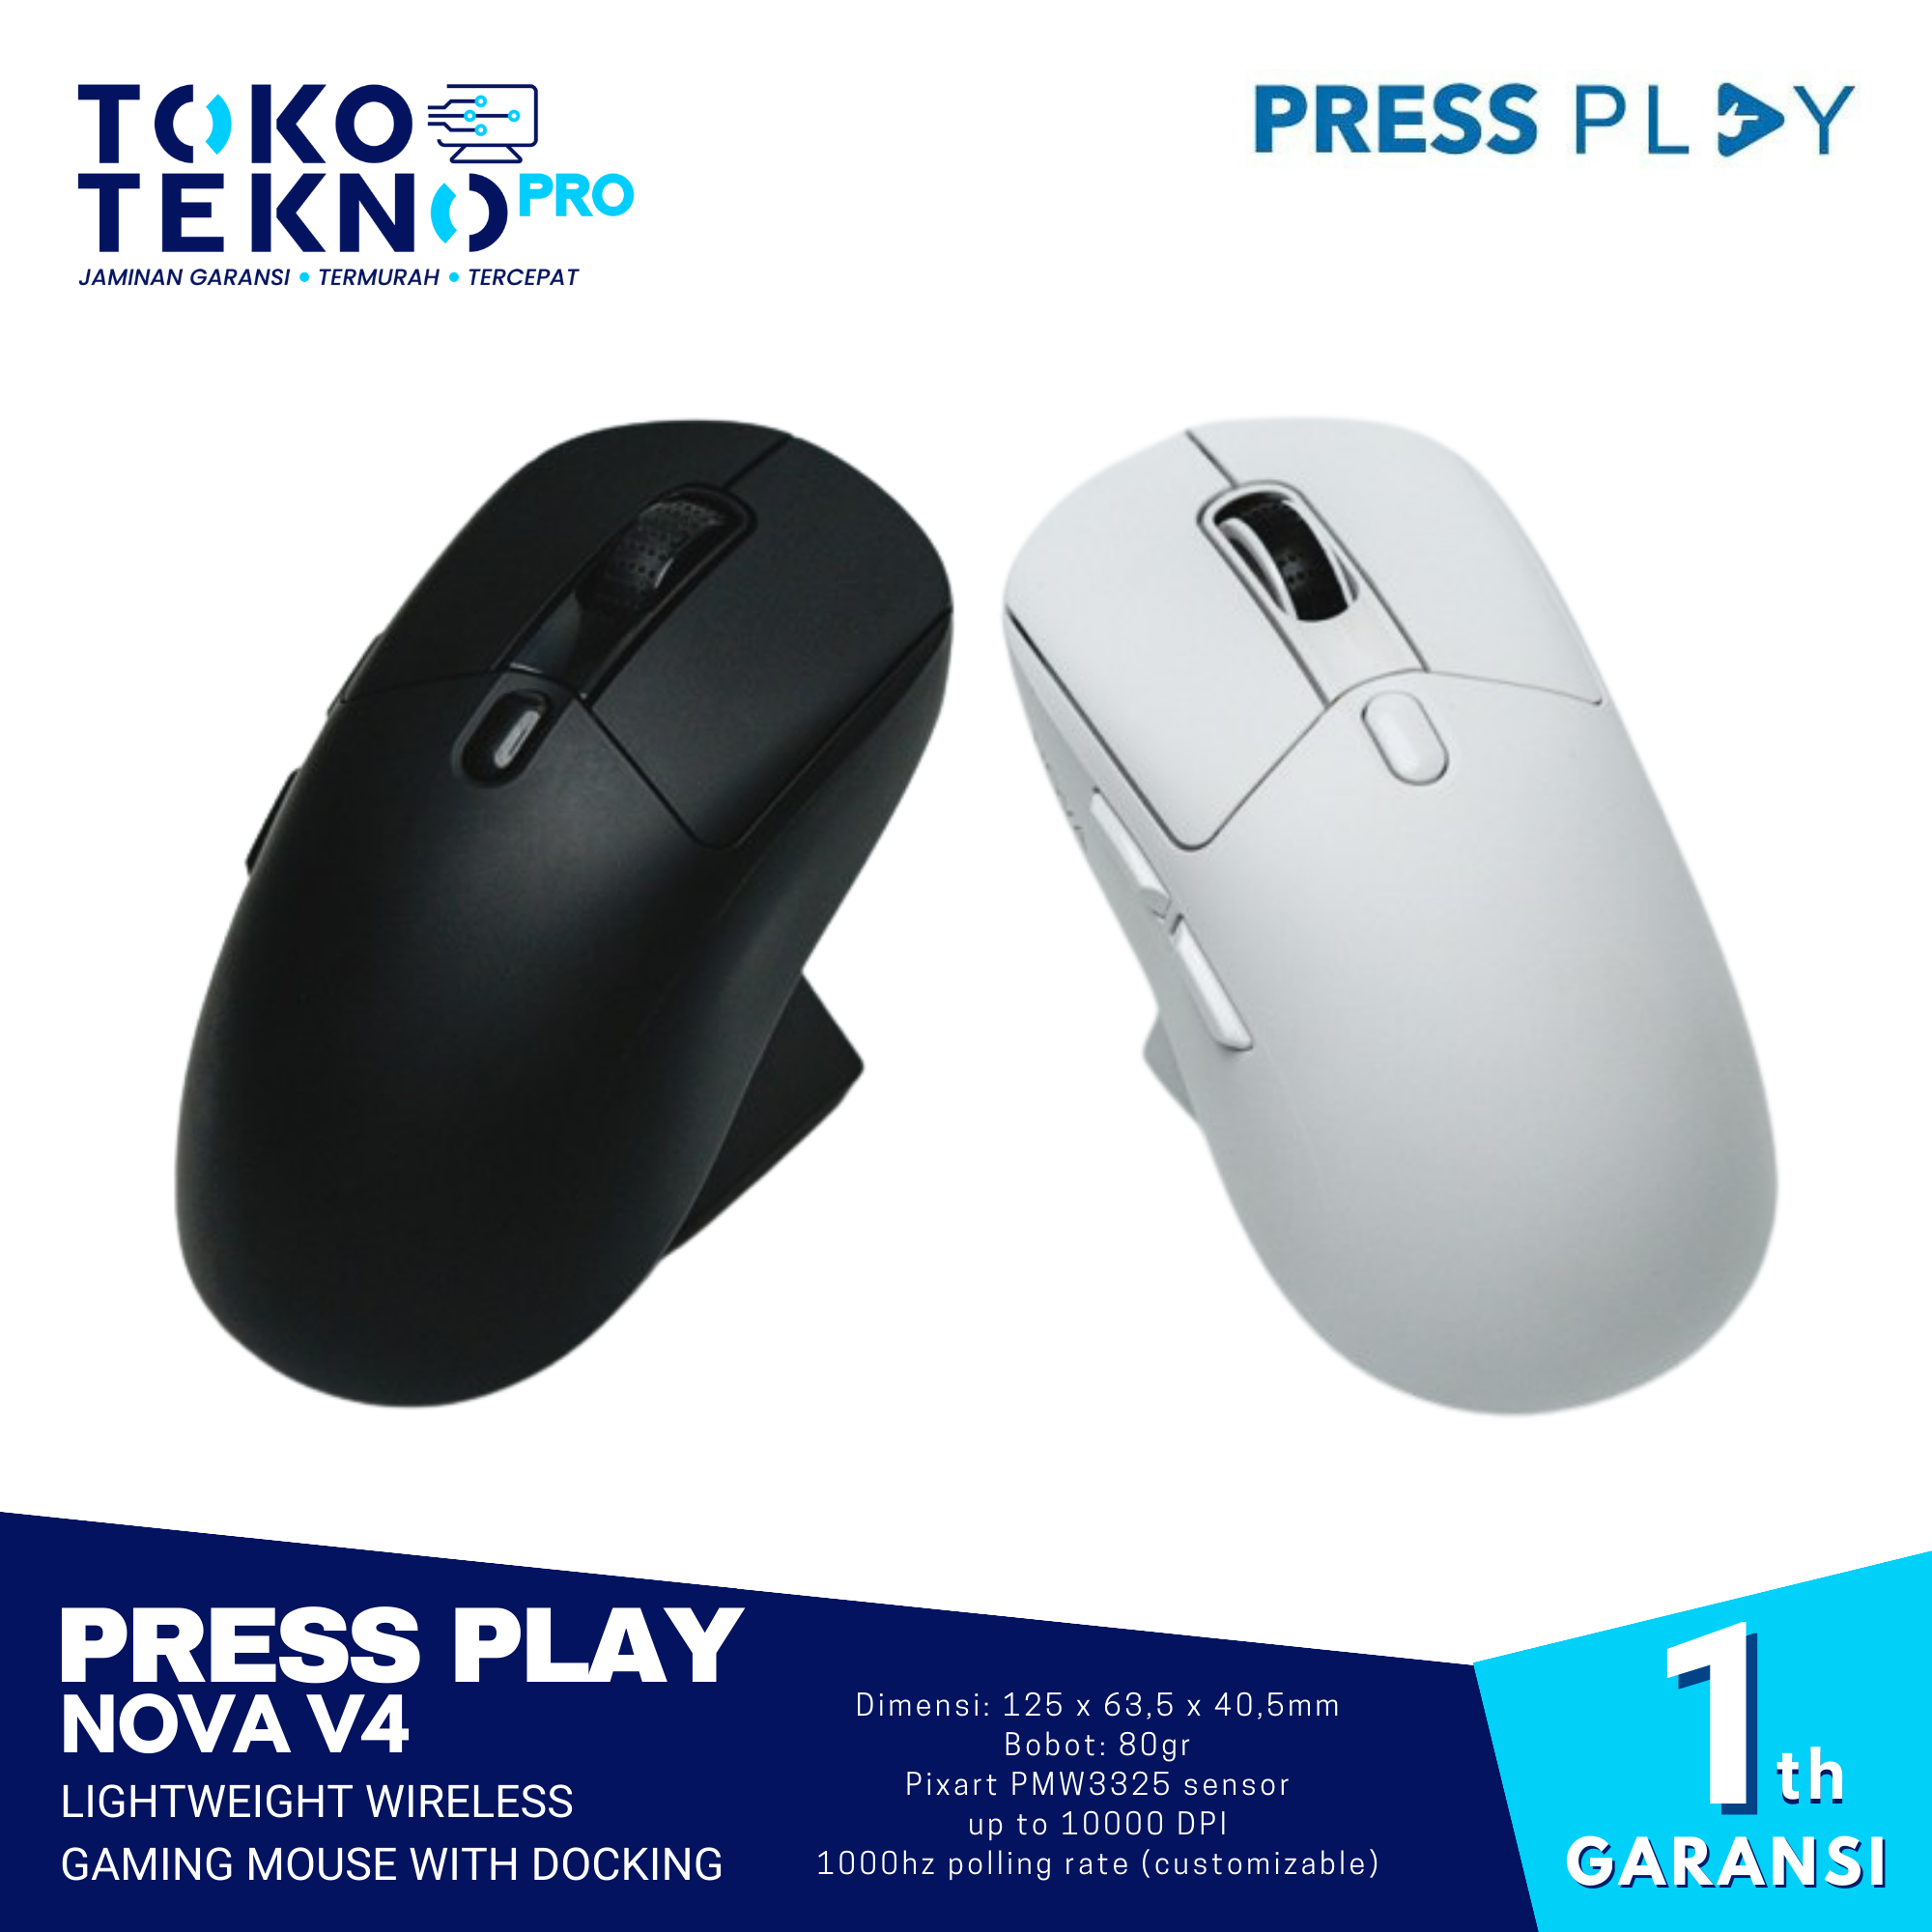 Press Play Nova V4 Lightweight Wireless Gaming Mouse With Docking